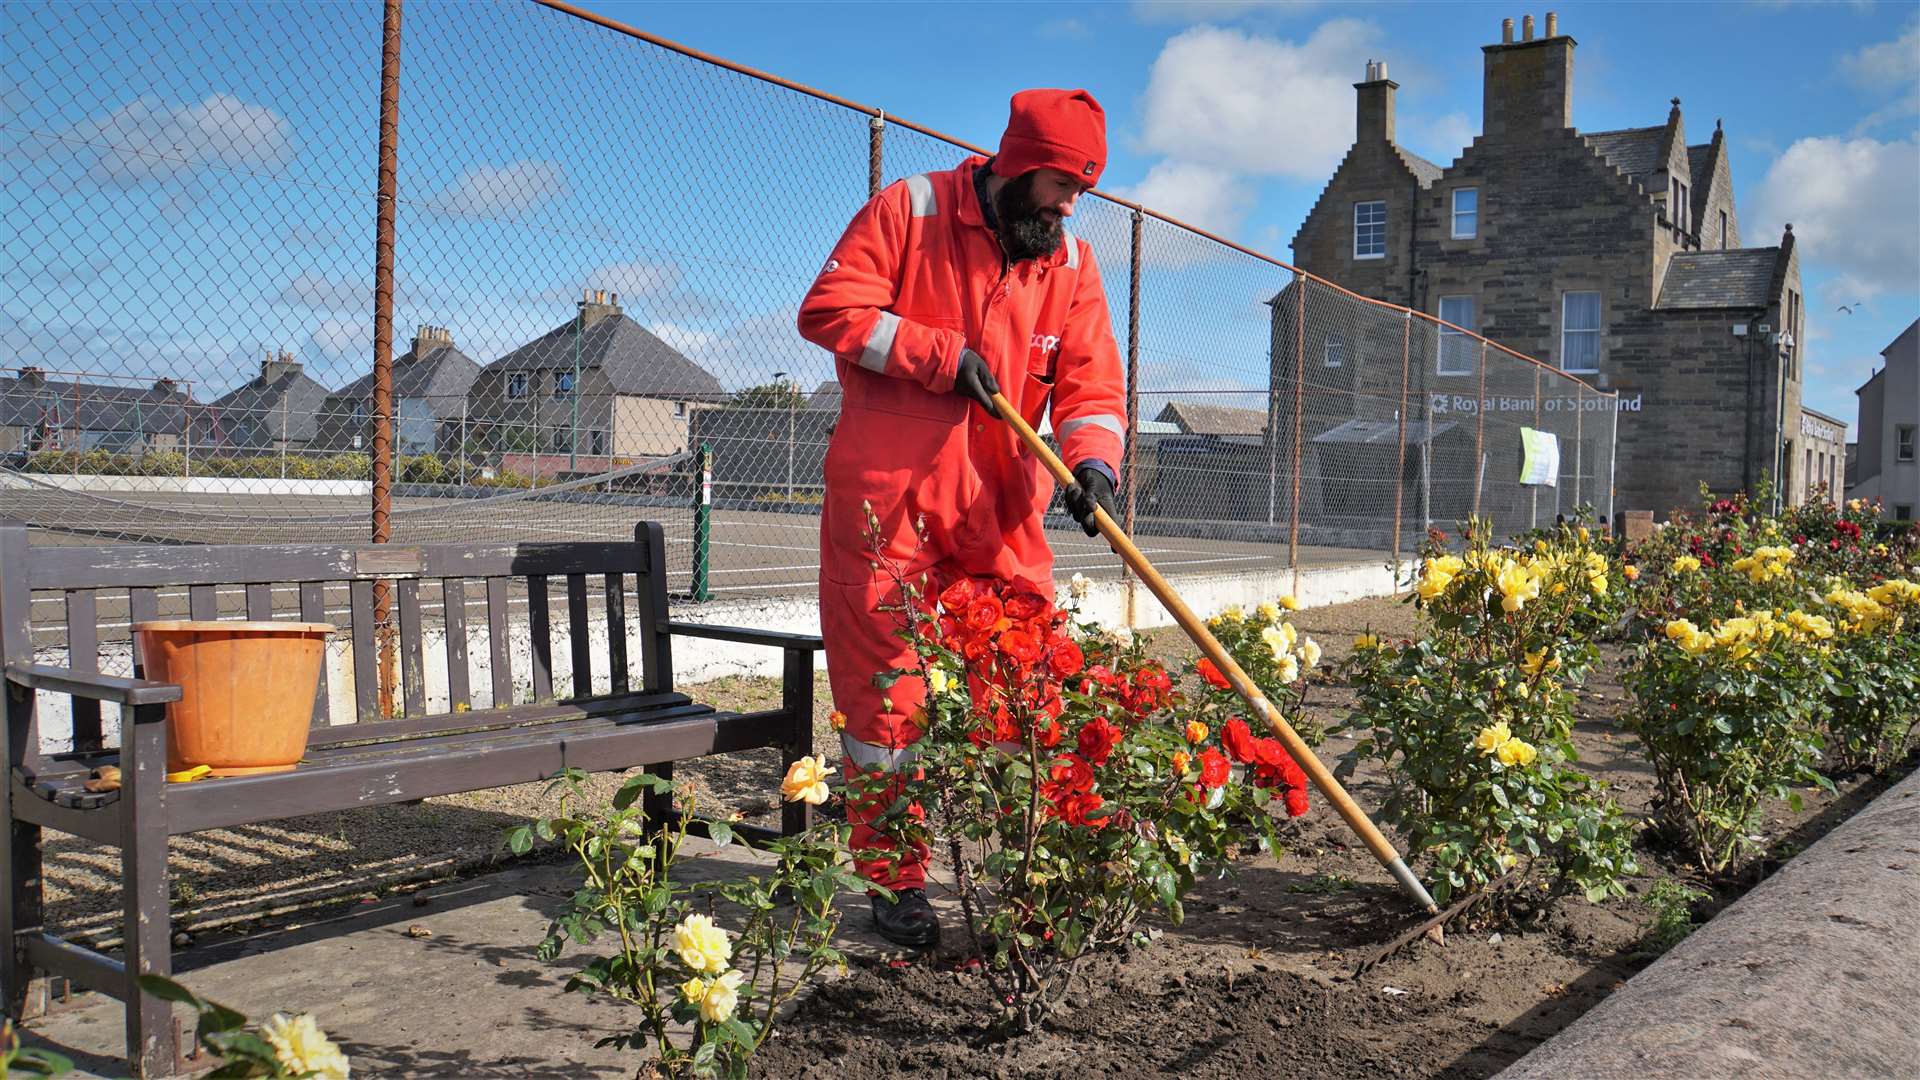 Alexander Glasgow tends the blooms on Olrig Street in Thurso. Picture: DGS